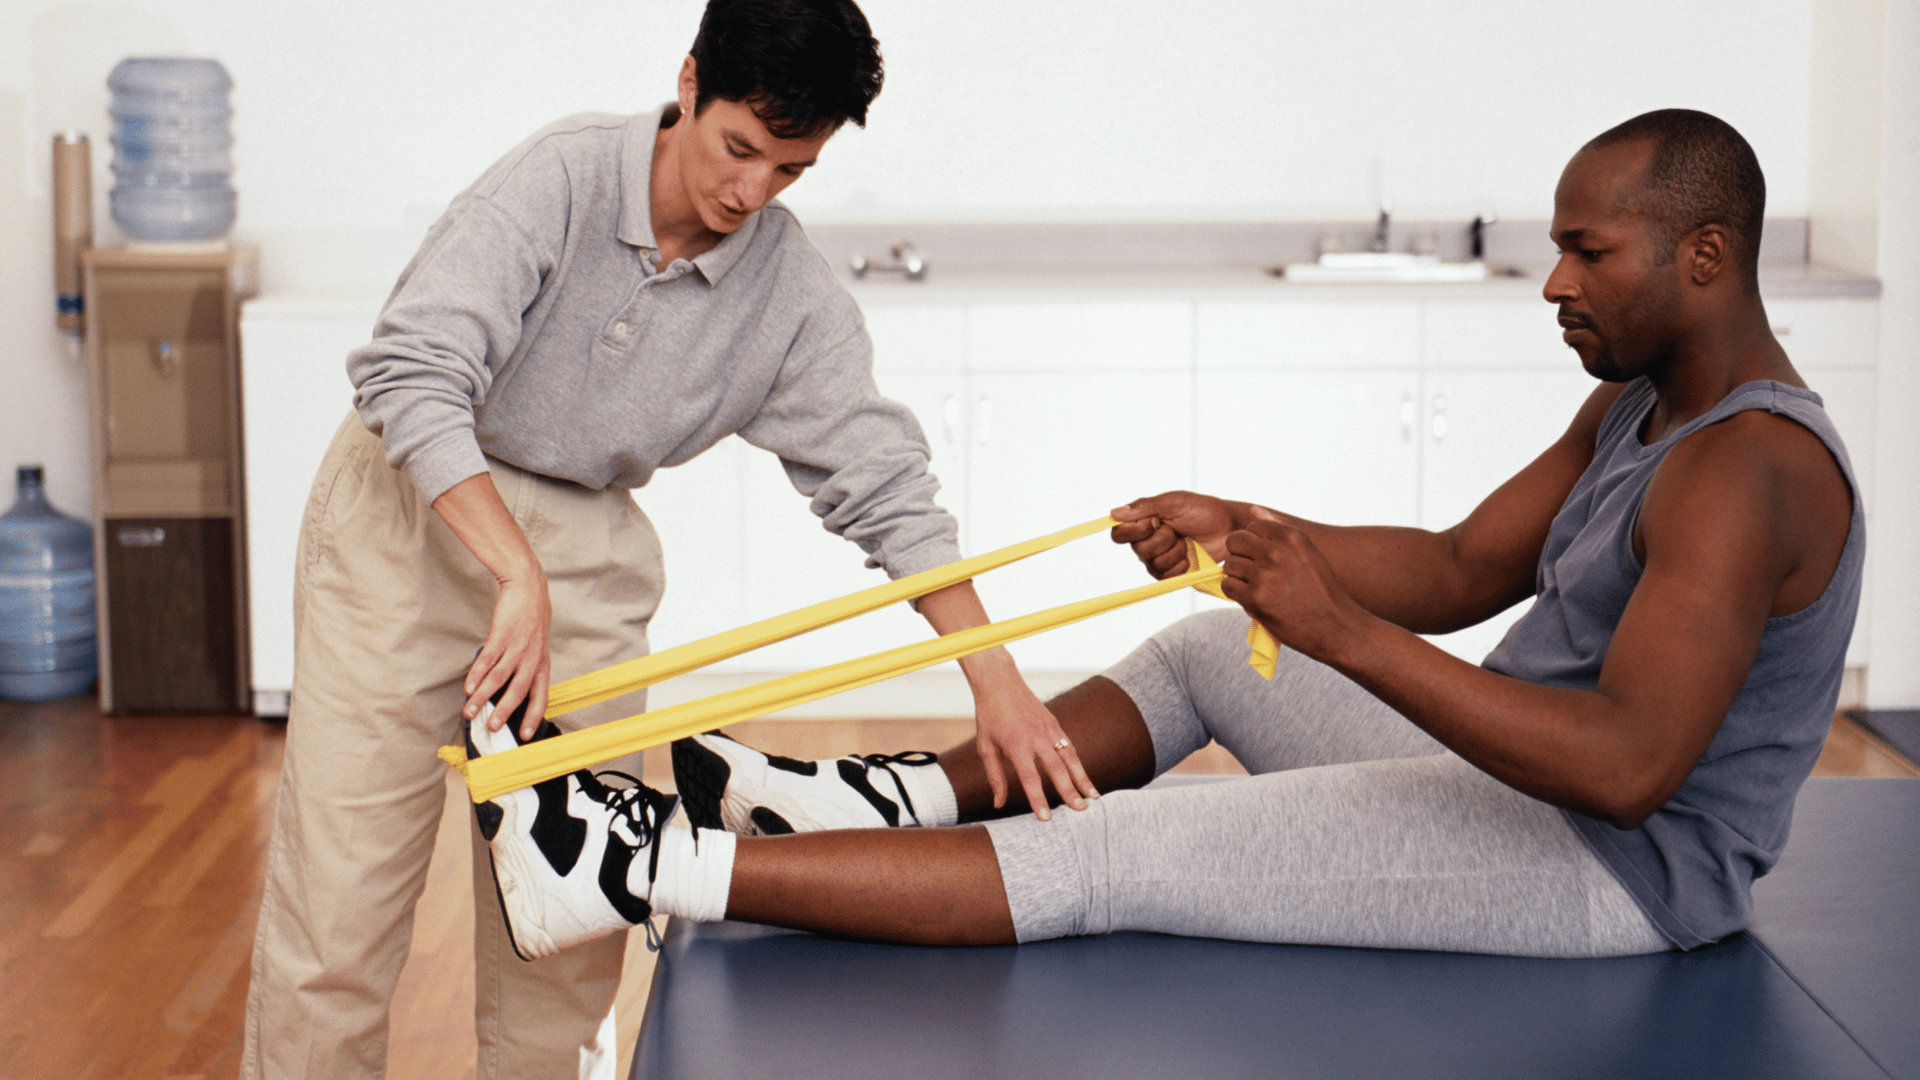 Physical therapy training